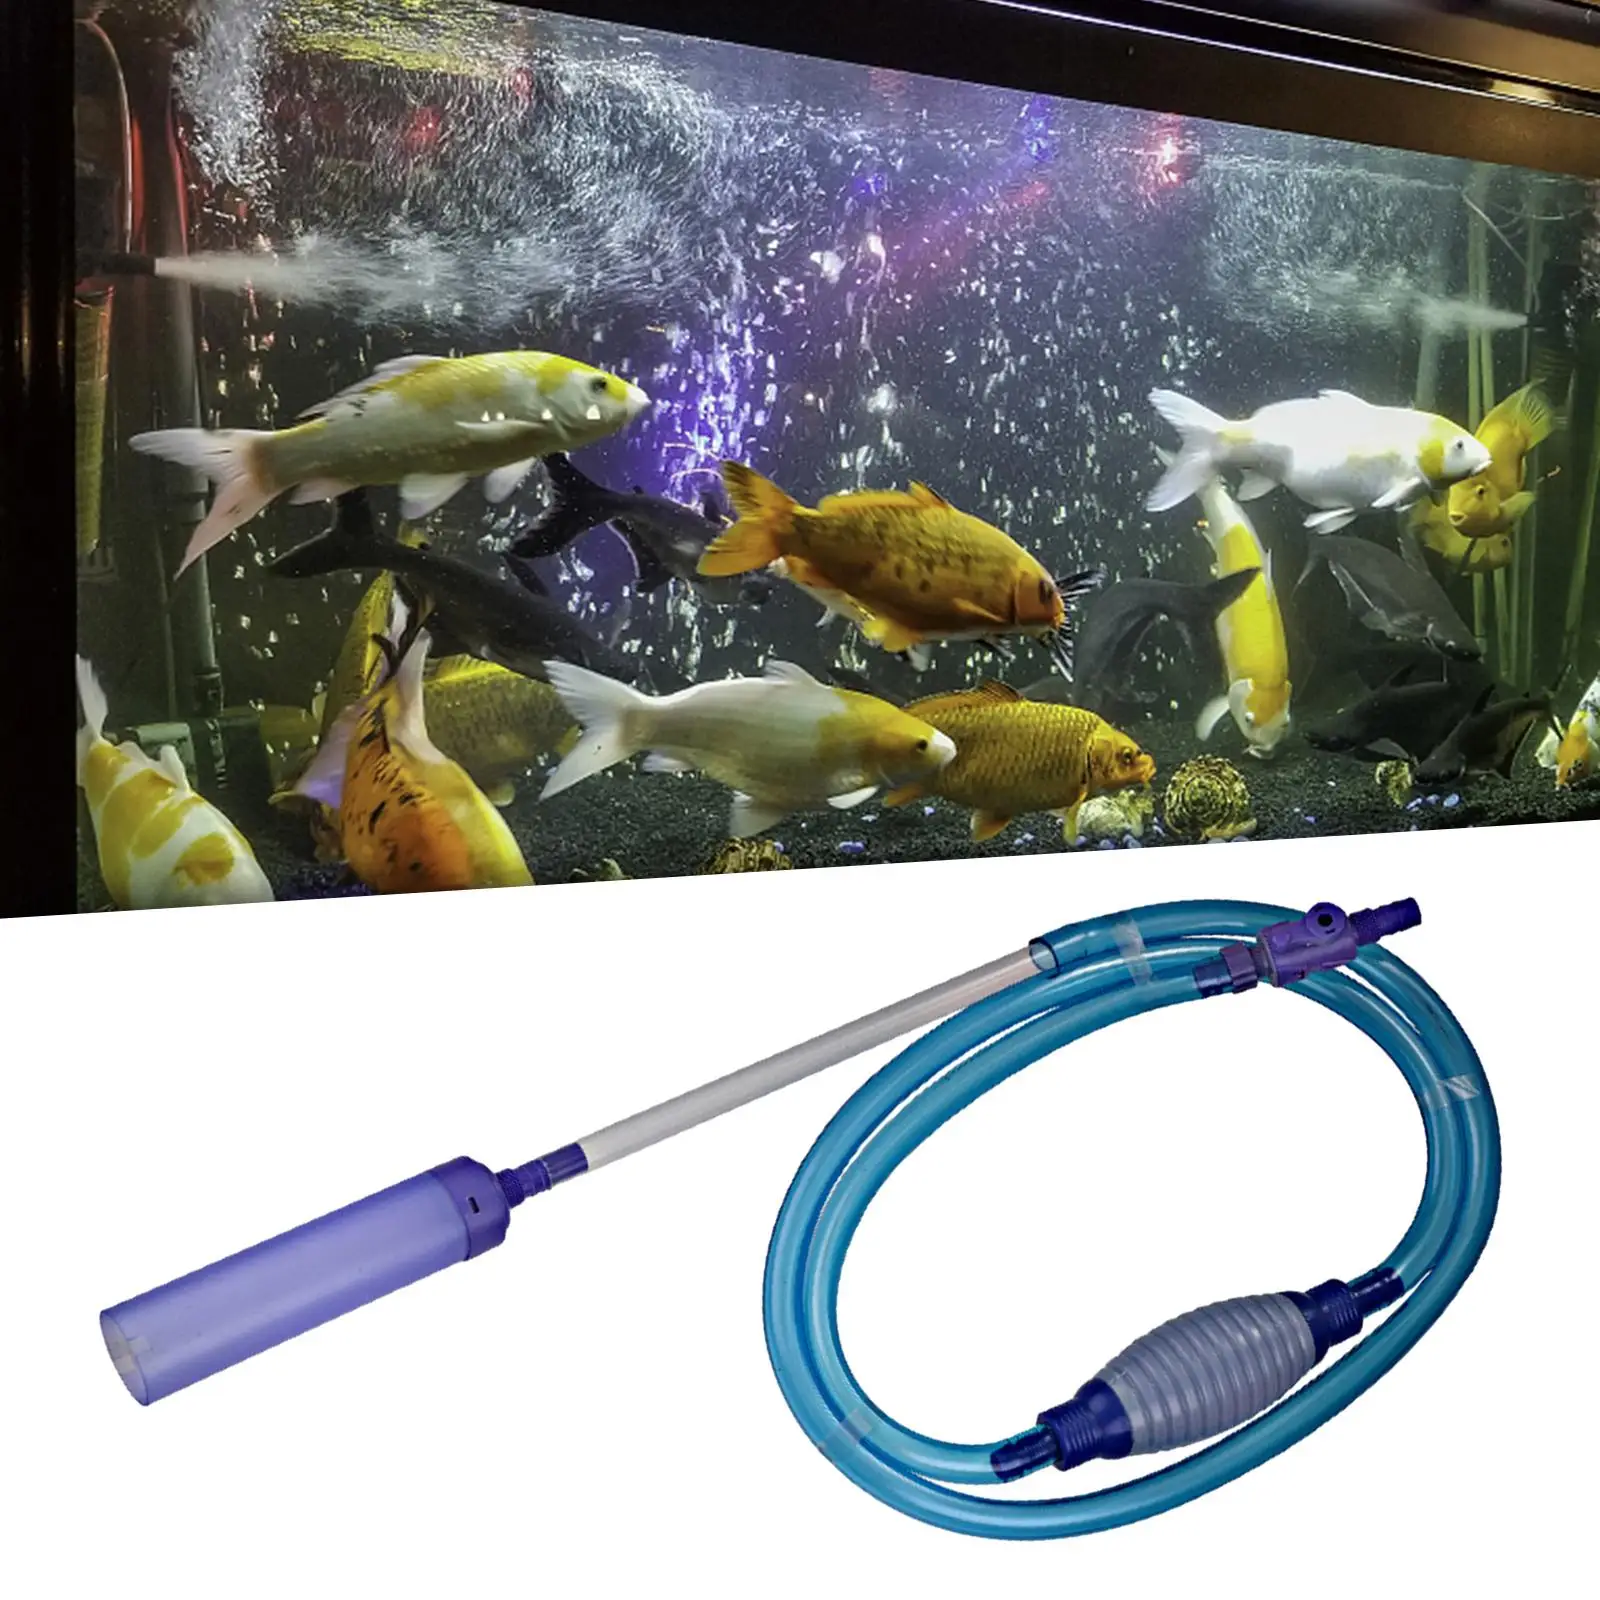 Fish Tank Water Change Water Changer Pump for Aquarium Cleaning Quick Water Change Sand Cleaning Small Fish Tanks Accessories